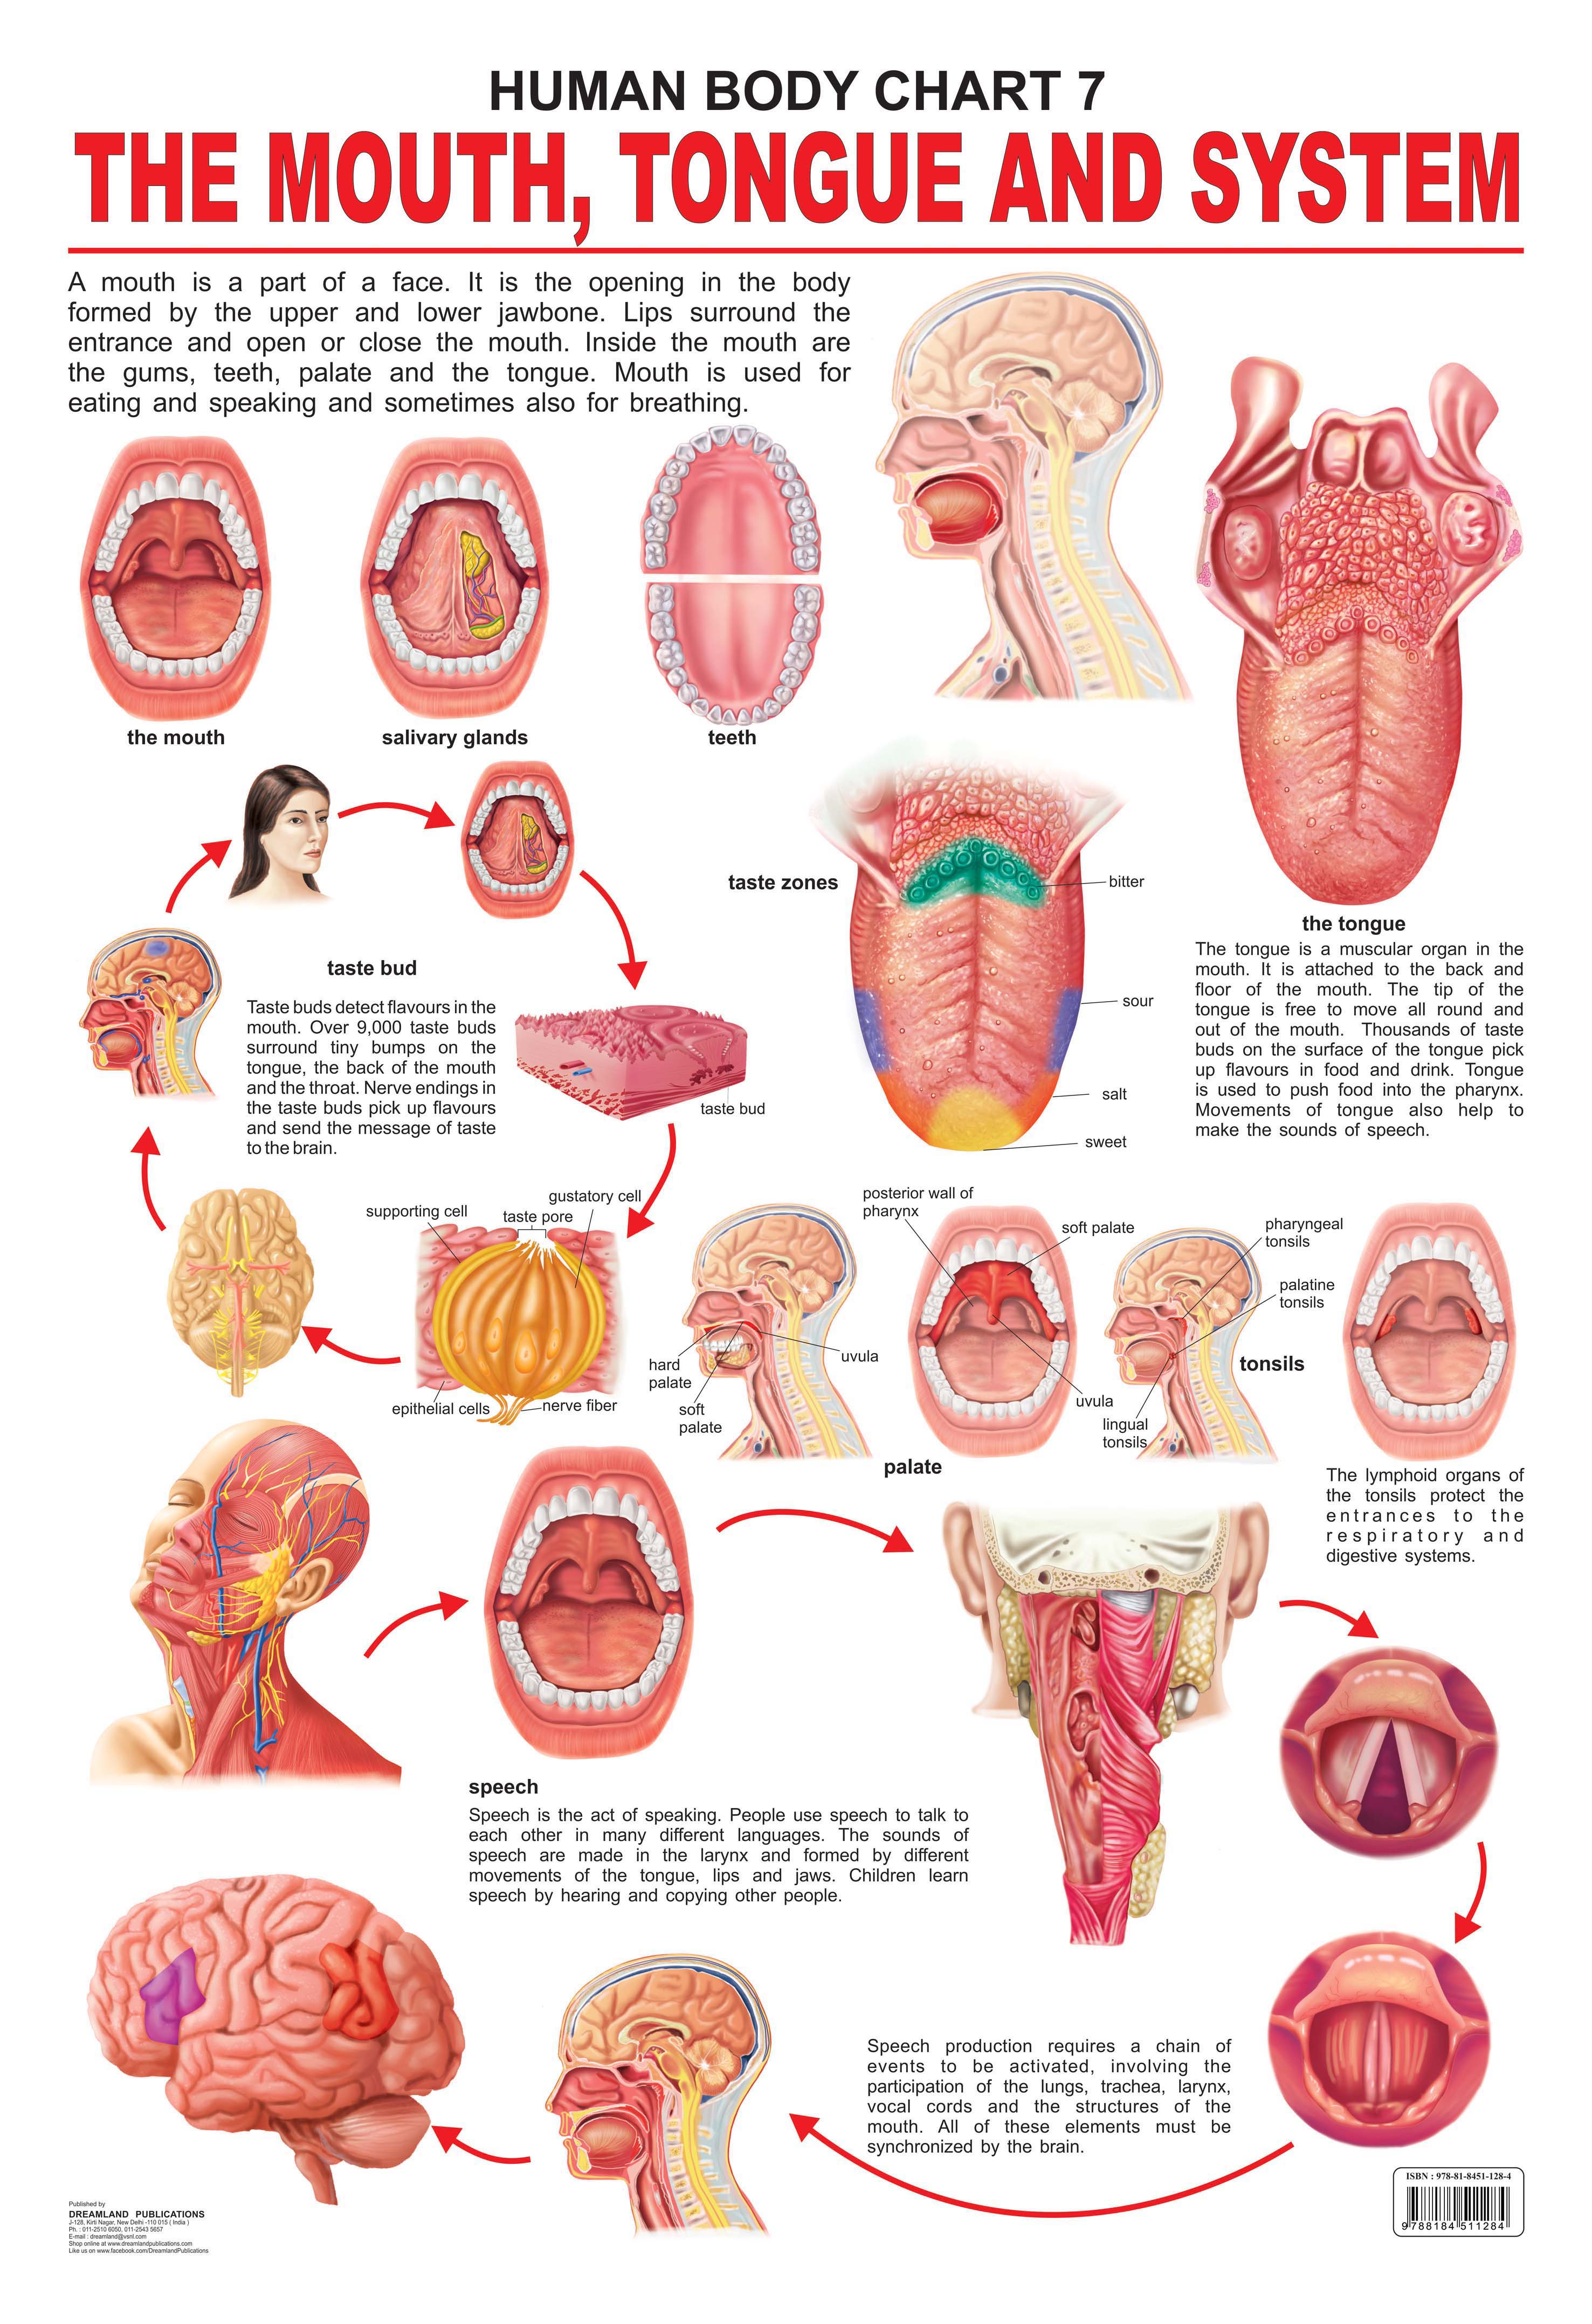 parts of the tongue for kids